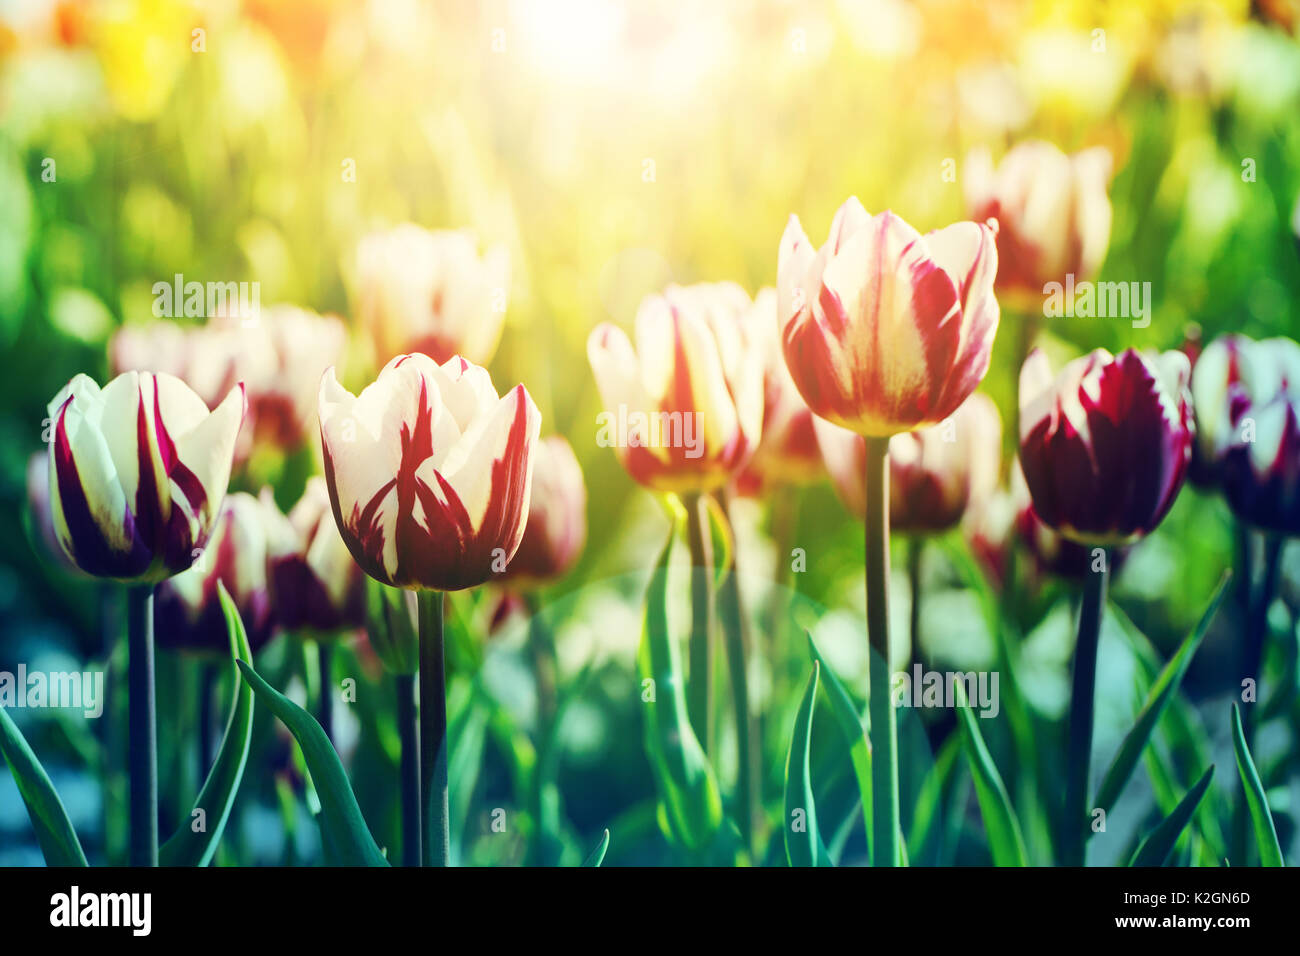 Beatiful background of tulips flower background in rim light with sunflare on the foreground, toned with modern orange-blue gradient, selective focus, Stock Photo